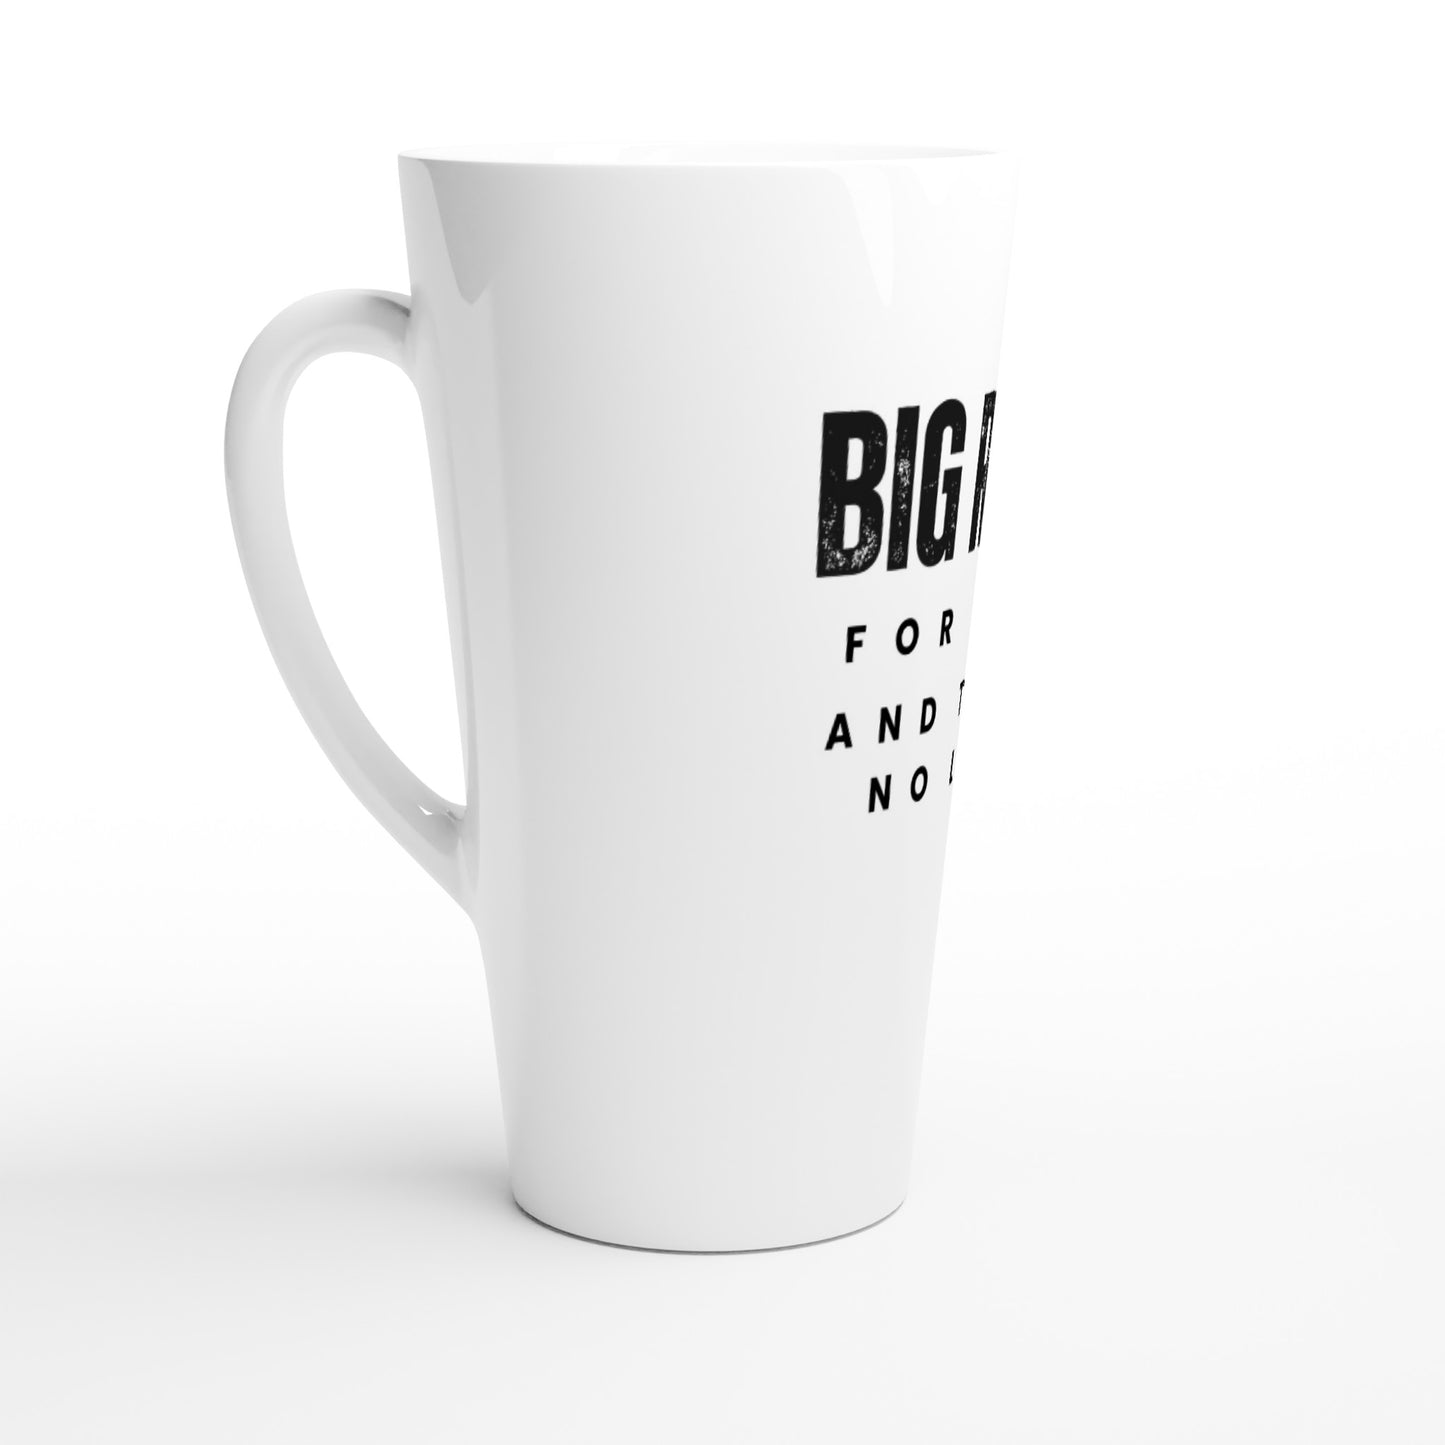 Big Rob's For Real Drinkwear